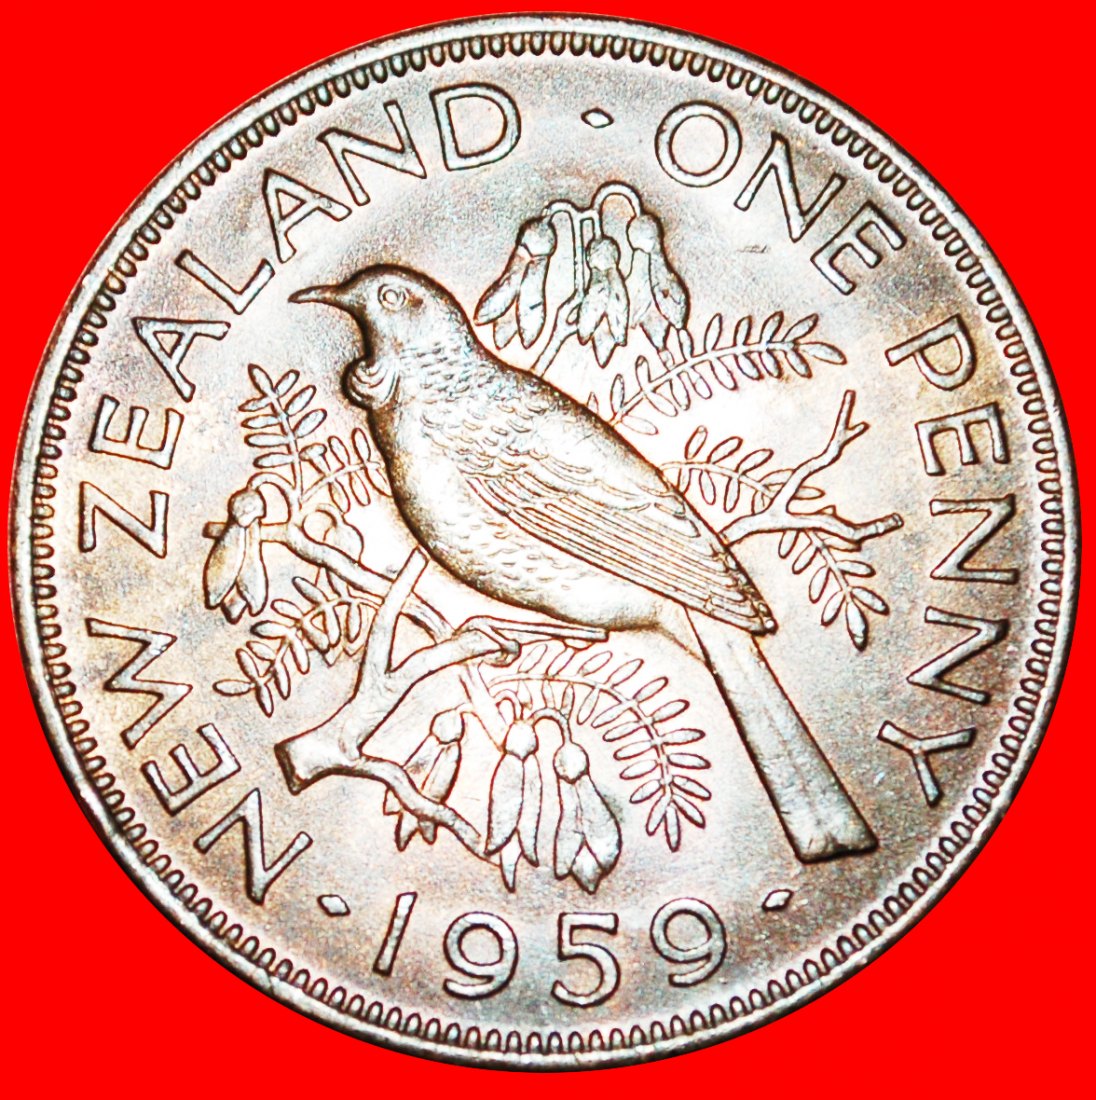  + BIRD AND FLOWERS: NEW ZEALAND ★ PENNY 1959 DRESSED QUEEN! LOW START ★ NO RESERVE!   